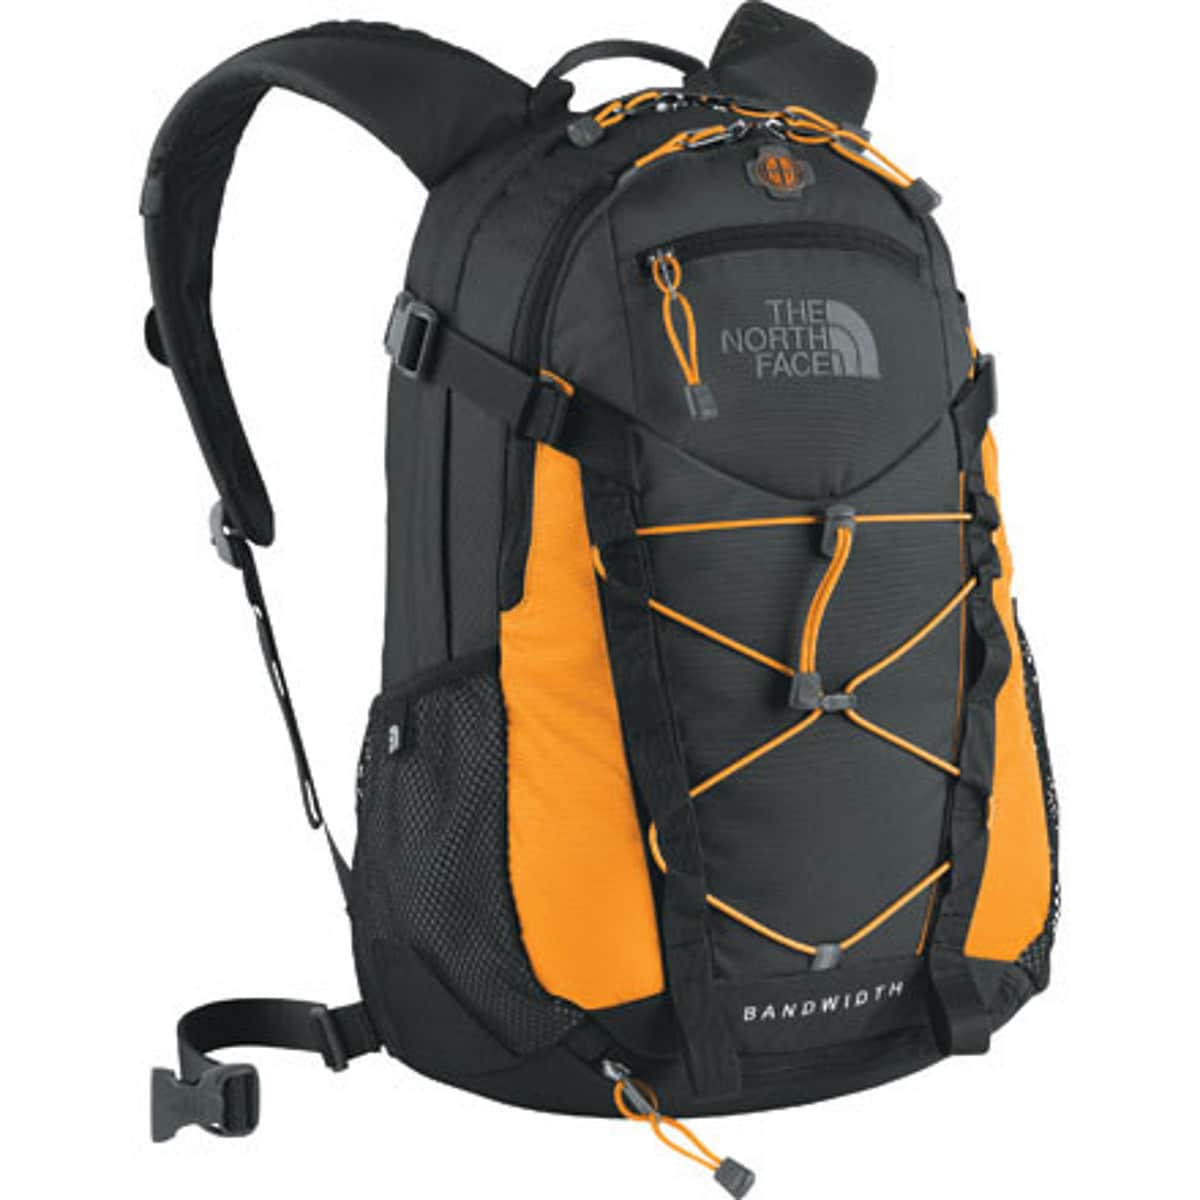 Pef Perth Blijven The North Face Bandwidth Backpack - 1850 cu in - Accessories